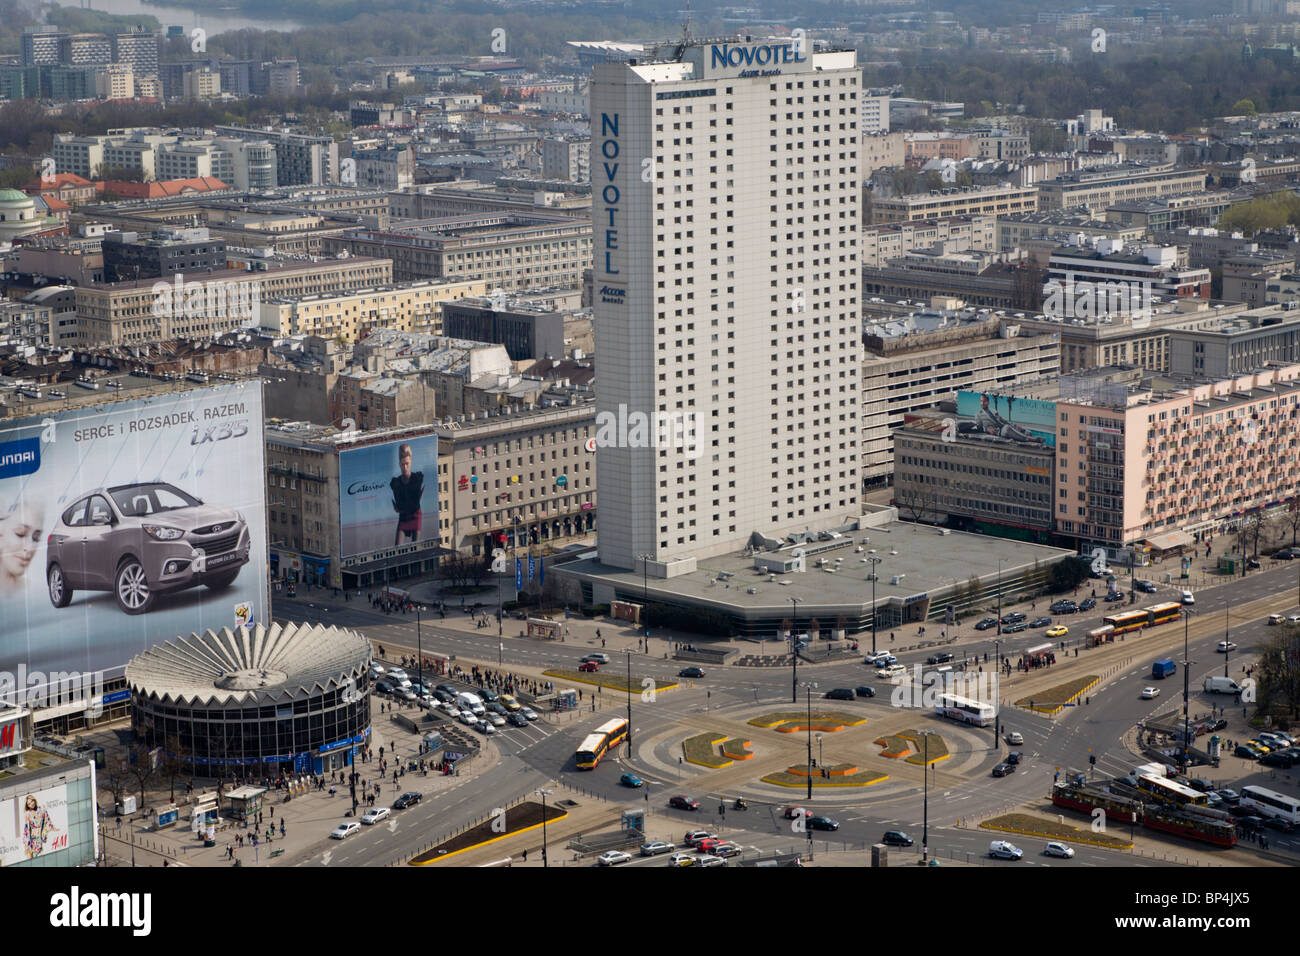 The view from the Palace of Culture and Science, Warsaw Poland. Stock Photo